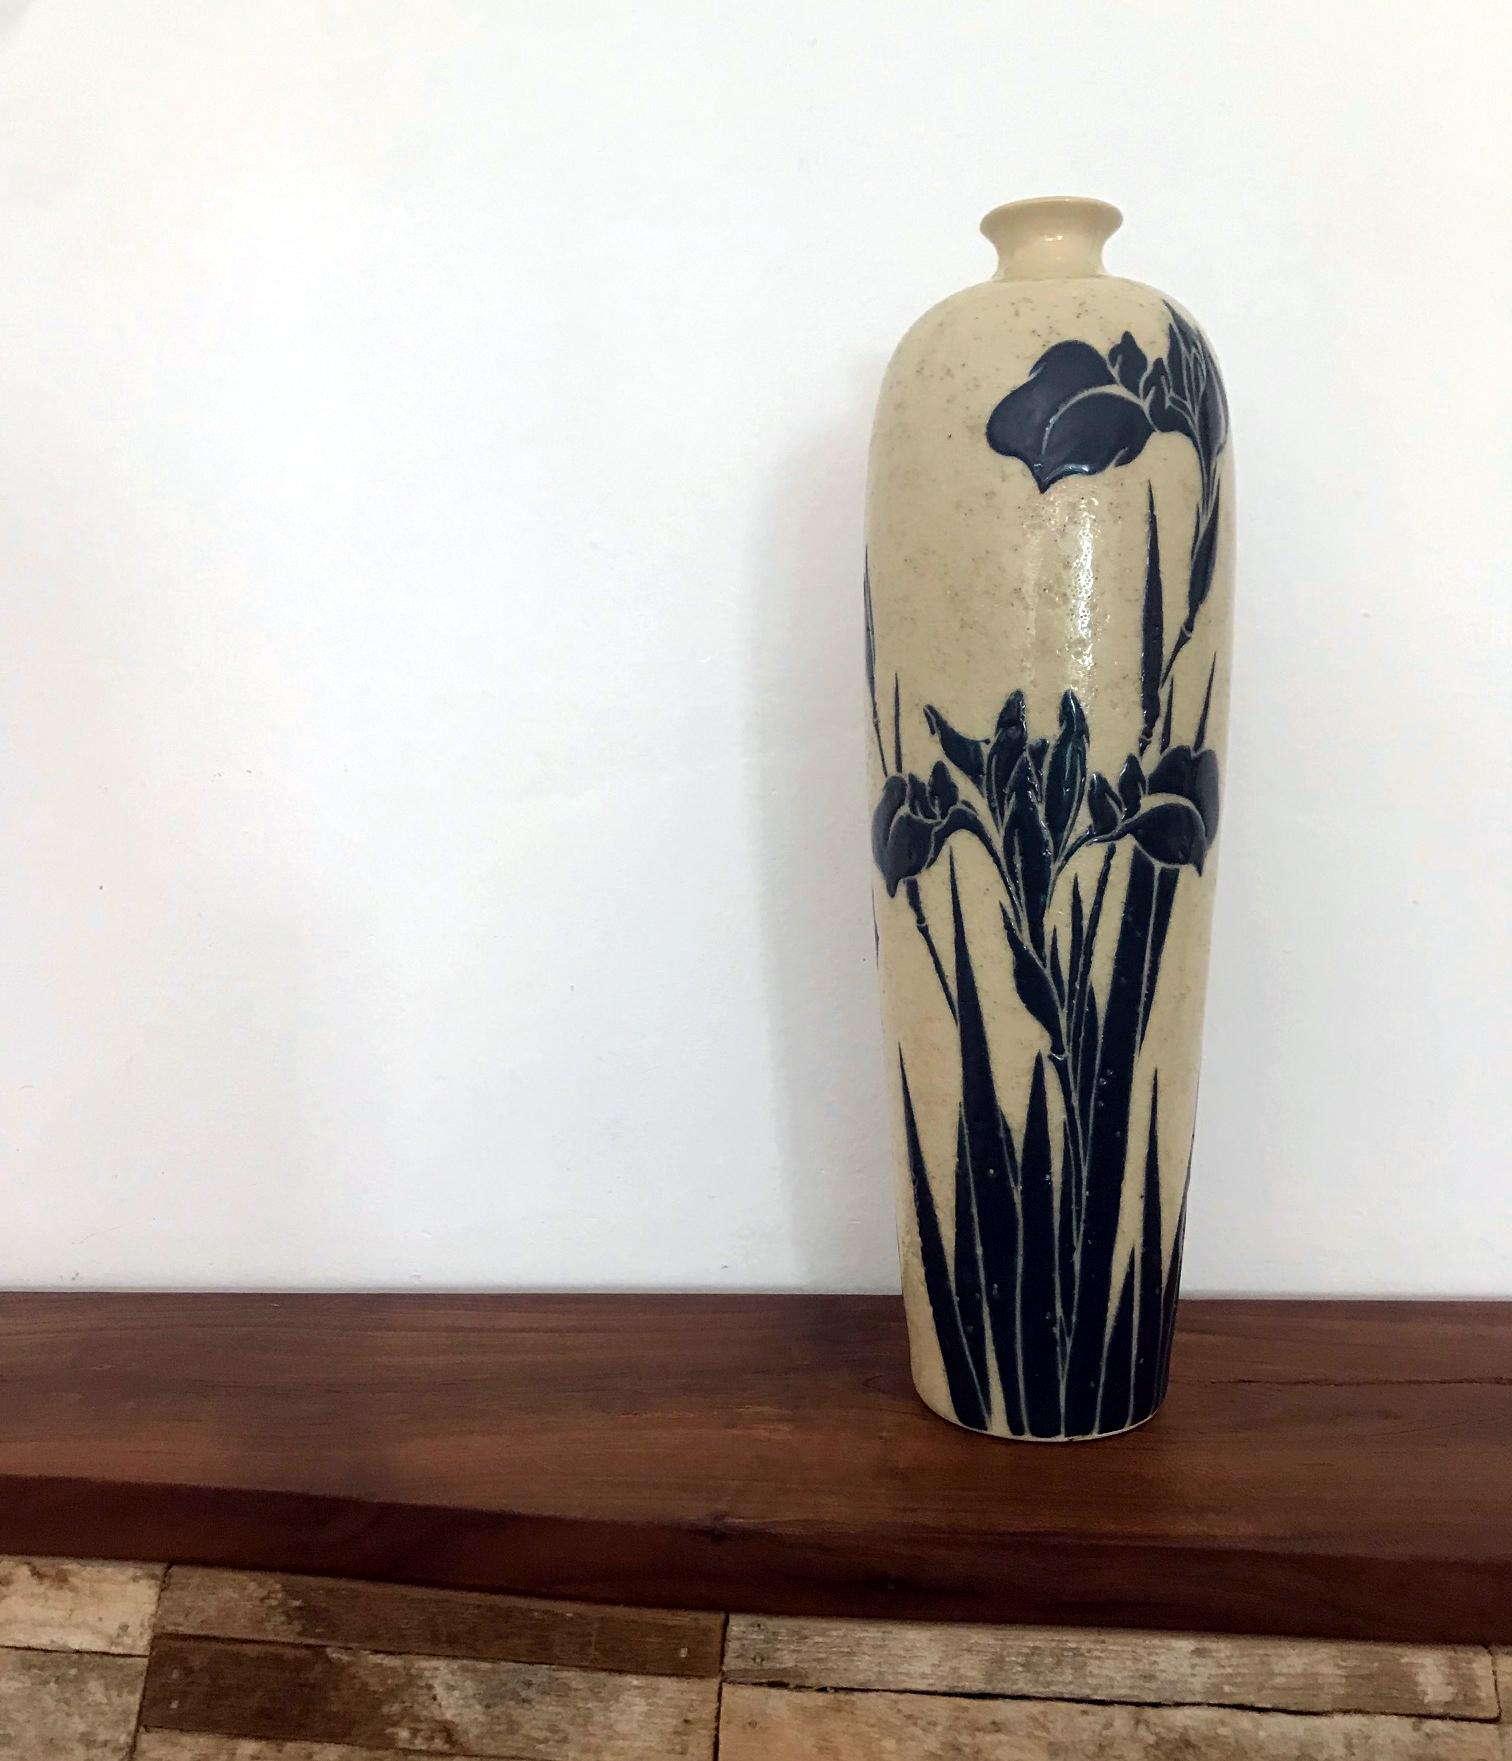 Japonisme Japanese Kyoto Ware Vase Attributed to Ninsei